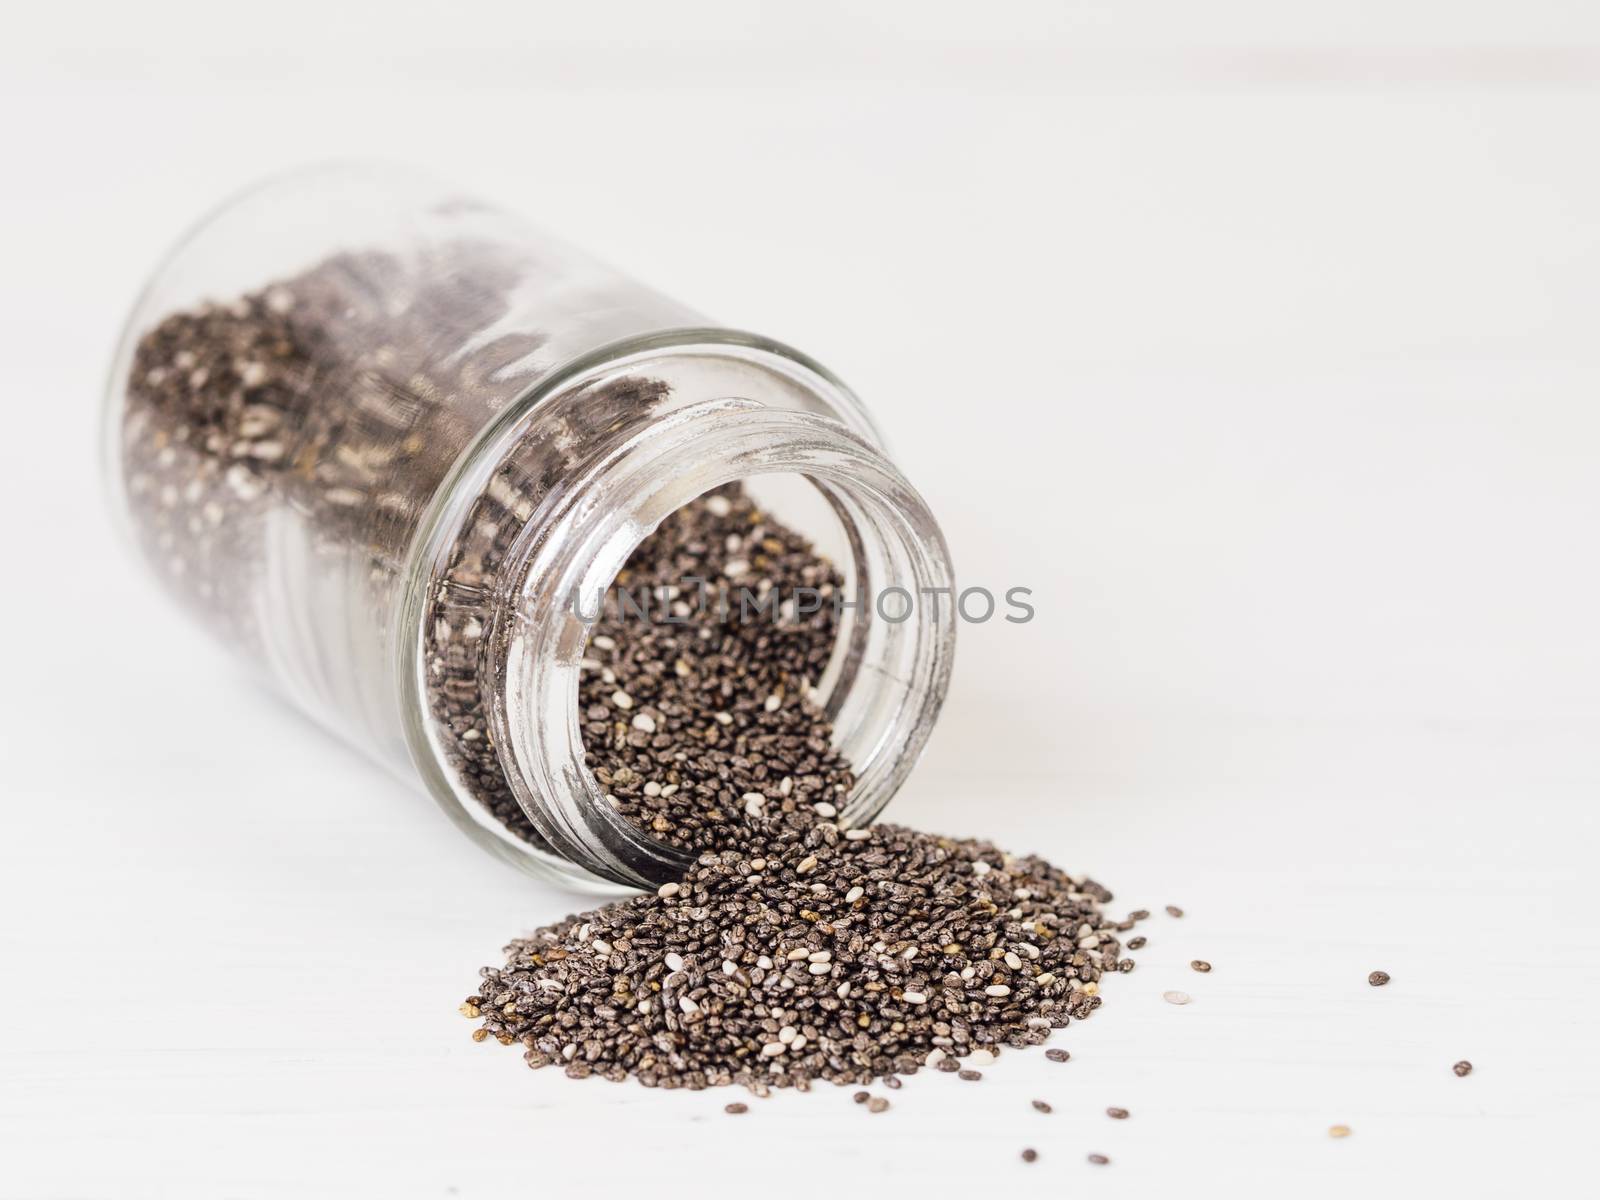 chia seeds scattered from glass jar on white background by fascinadora